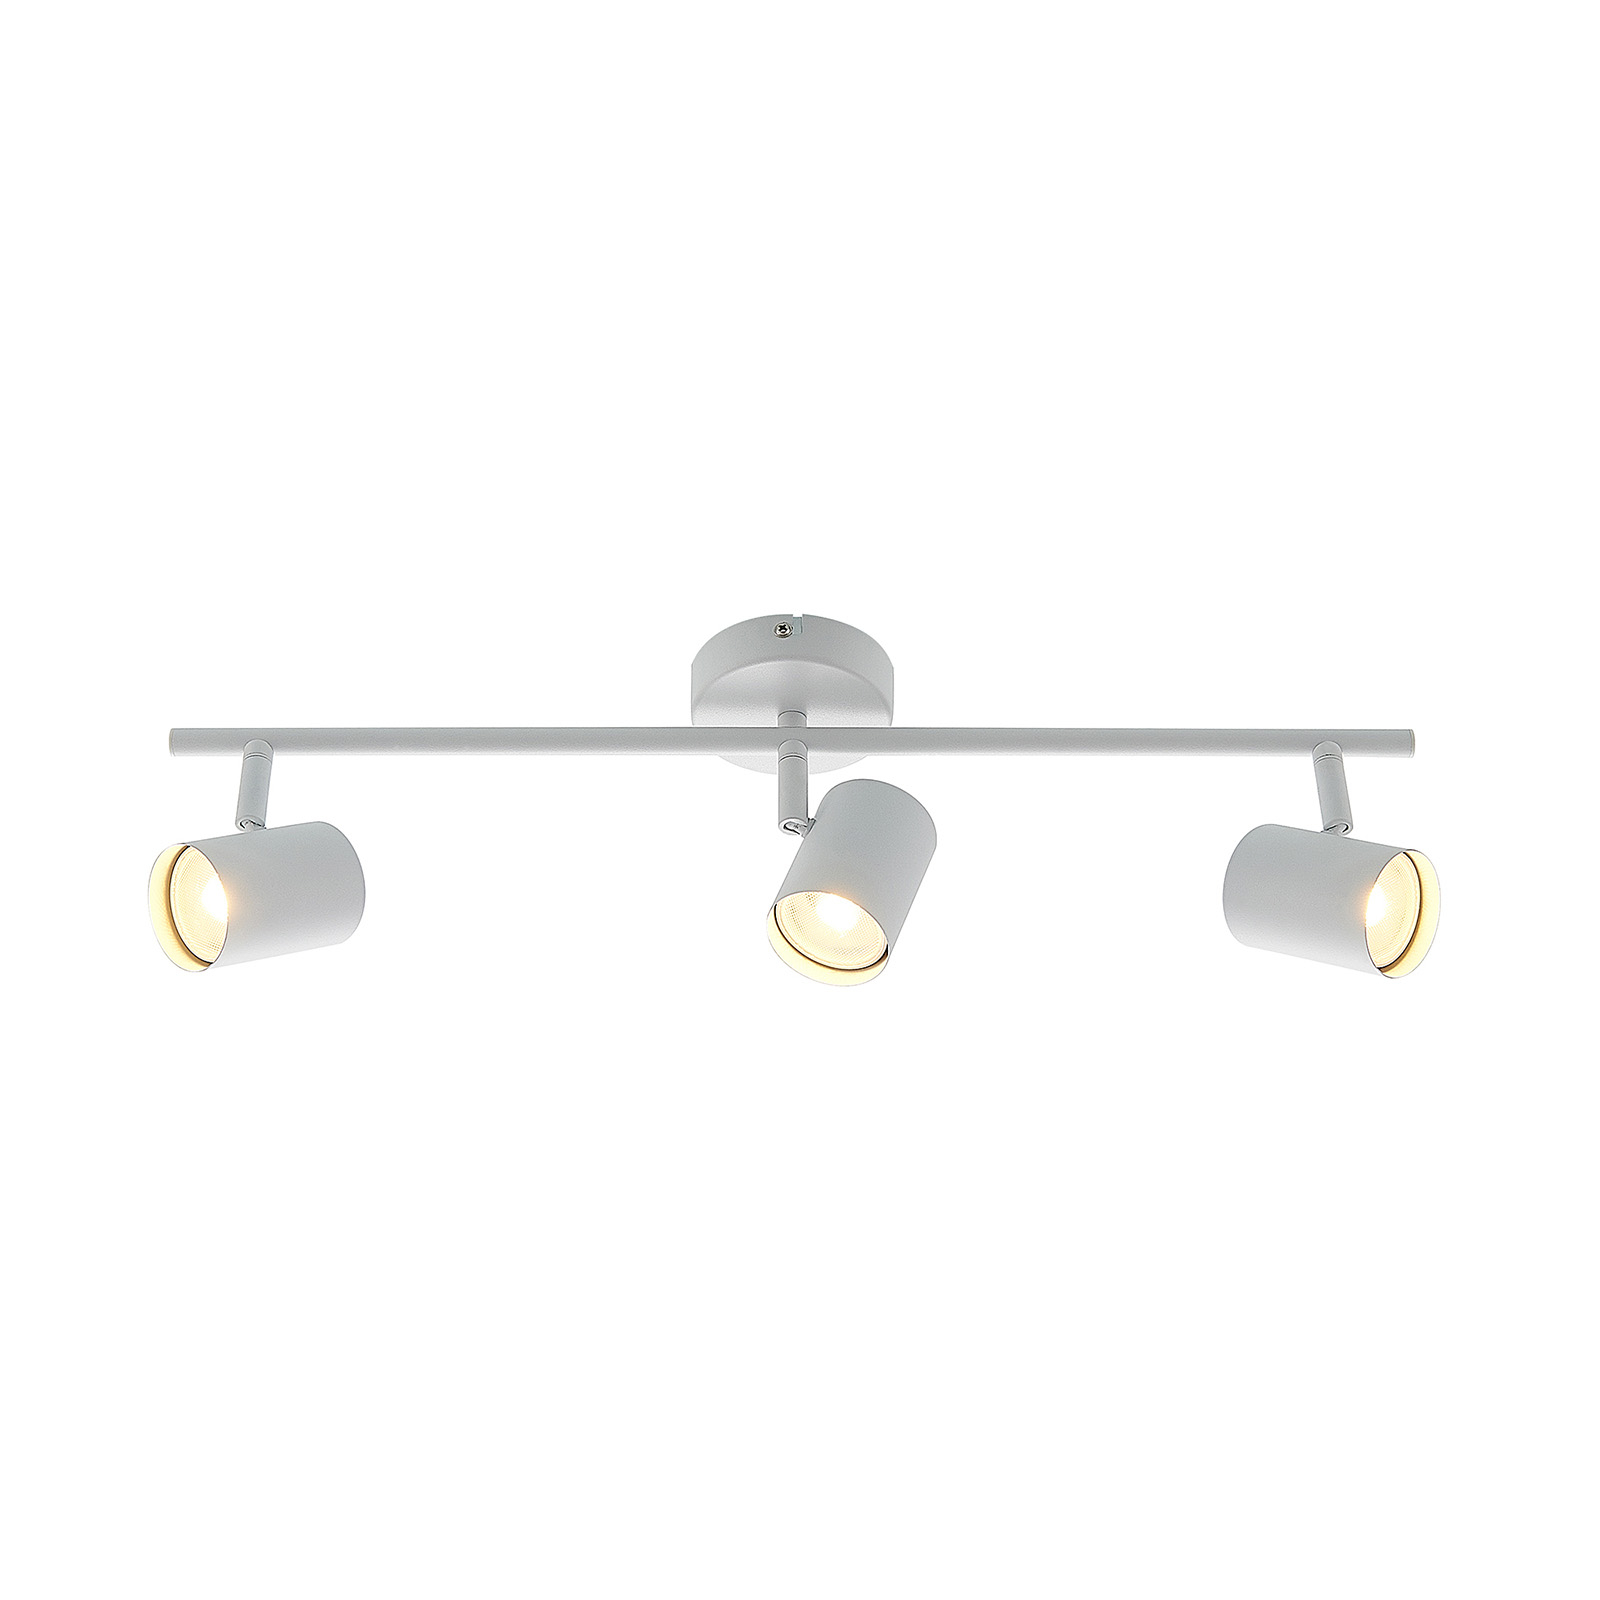 Lindby plafondlamp Jorell, mat wit, 3-lamps, staal